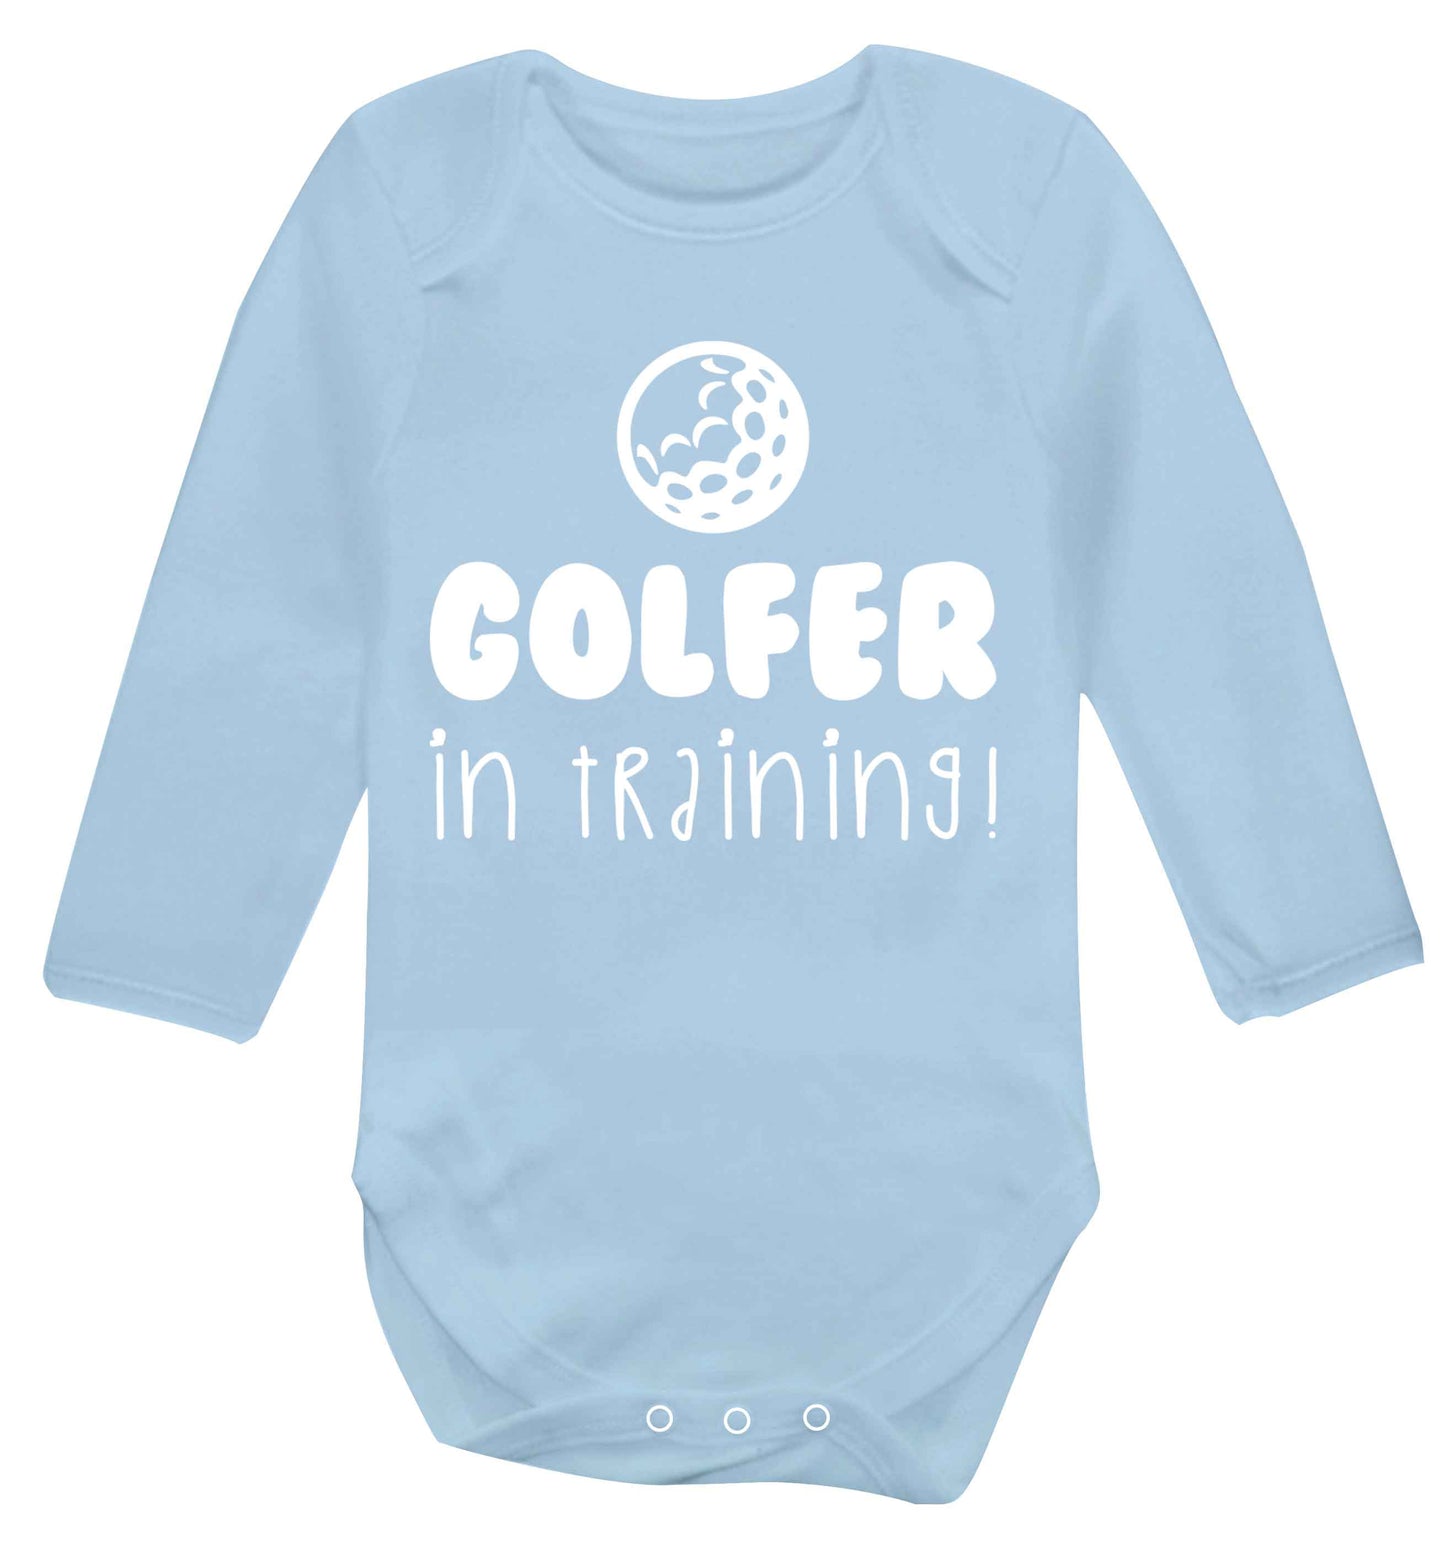 Golfer in training Baby Vest long sleeved pale blue 6-12 months